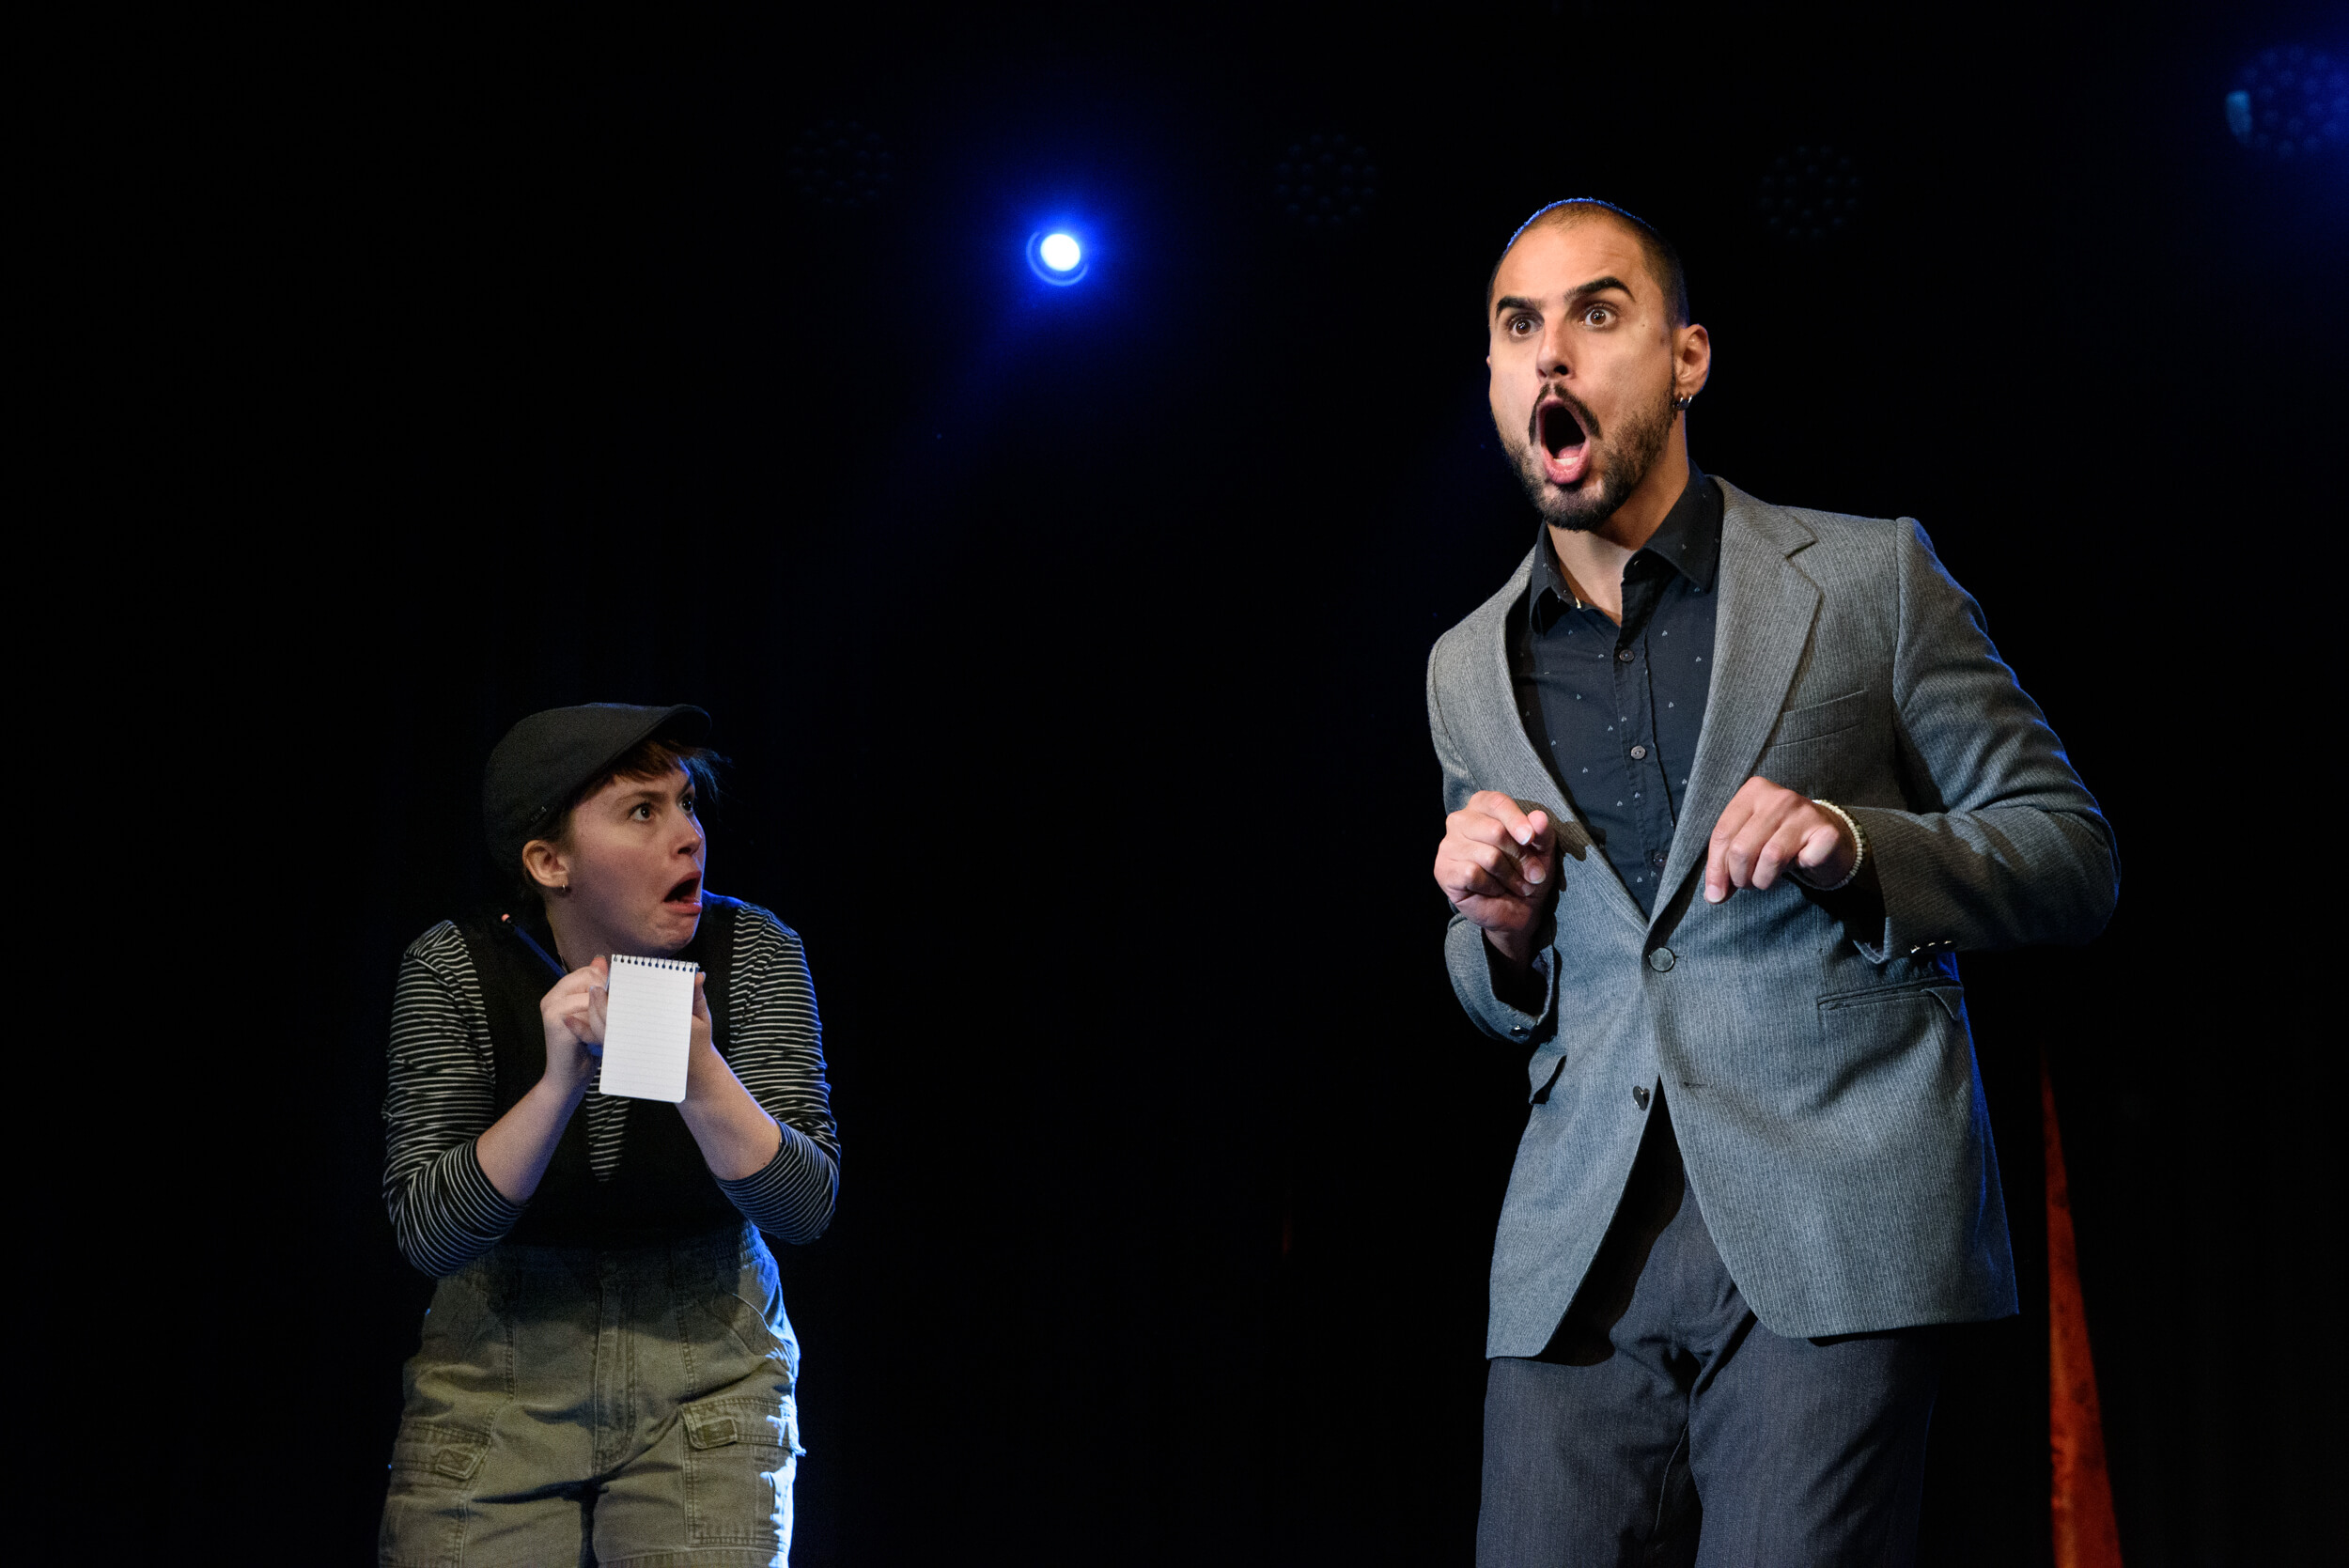 A performer wearing a grey suit is holding his hands up to his chest, imitating a lizard. Another performer is looking at him with a shocked expression. She is writing in a small notebook.